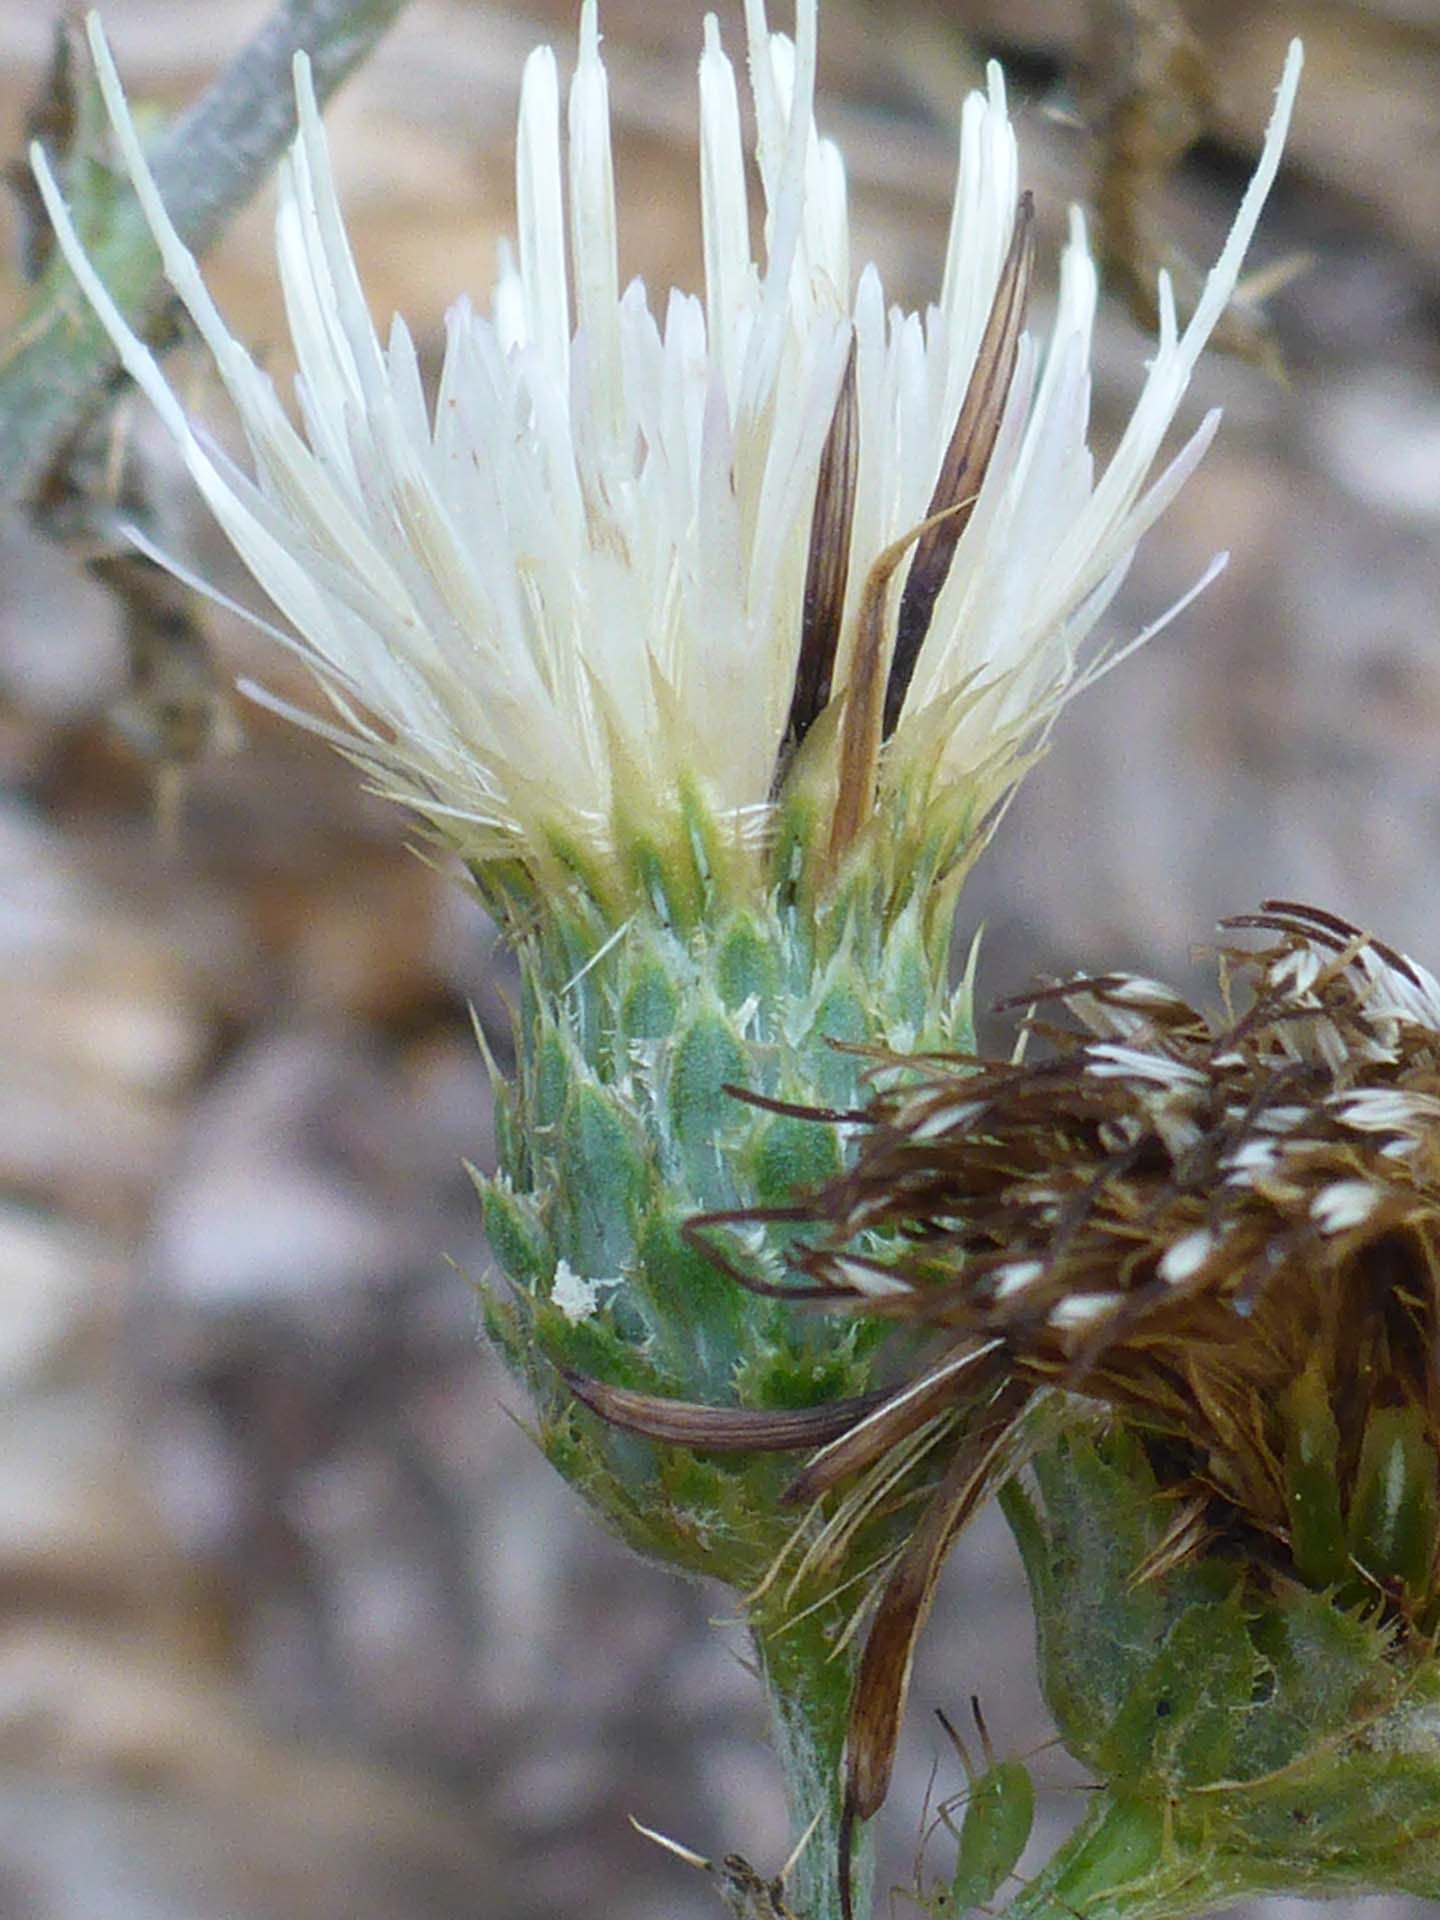 Remote-leaved thistle close-up. D. Burk.